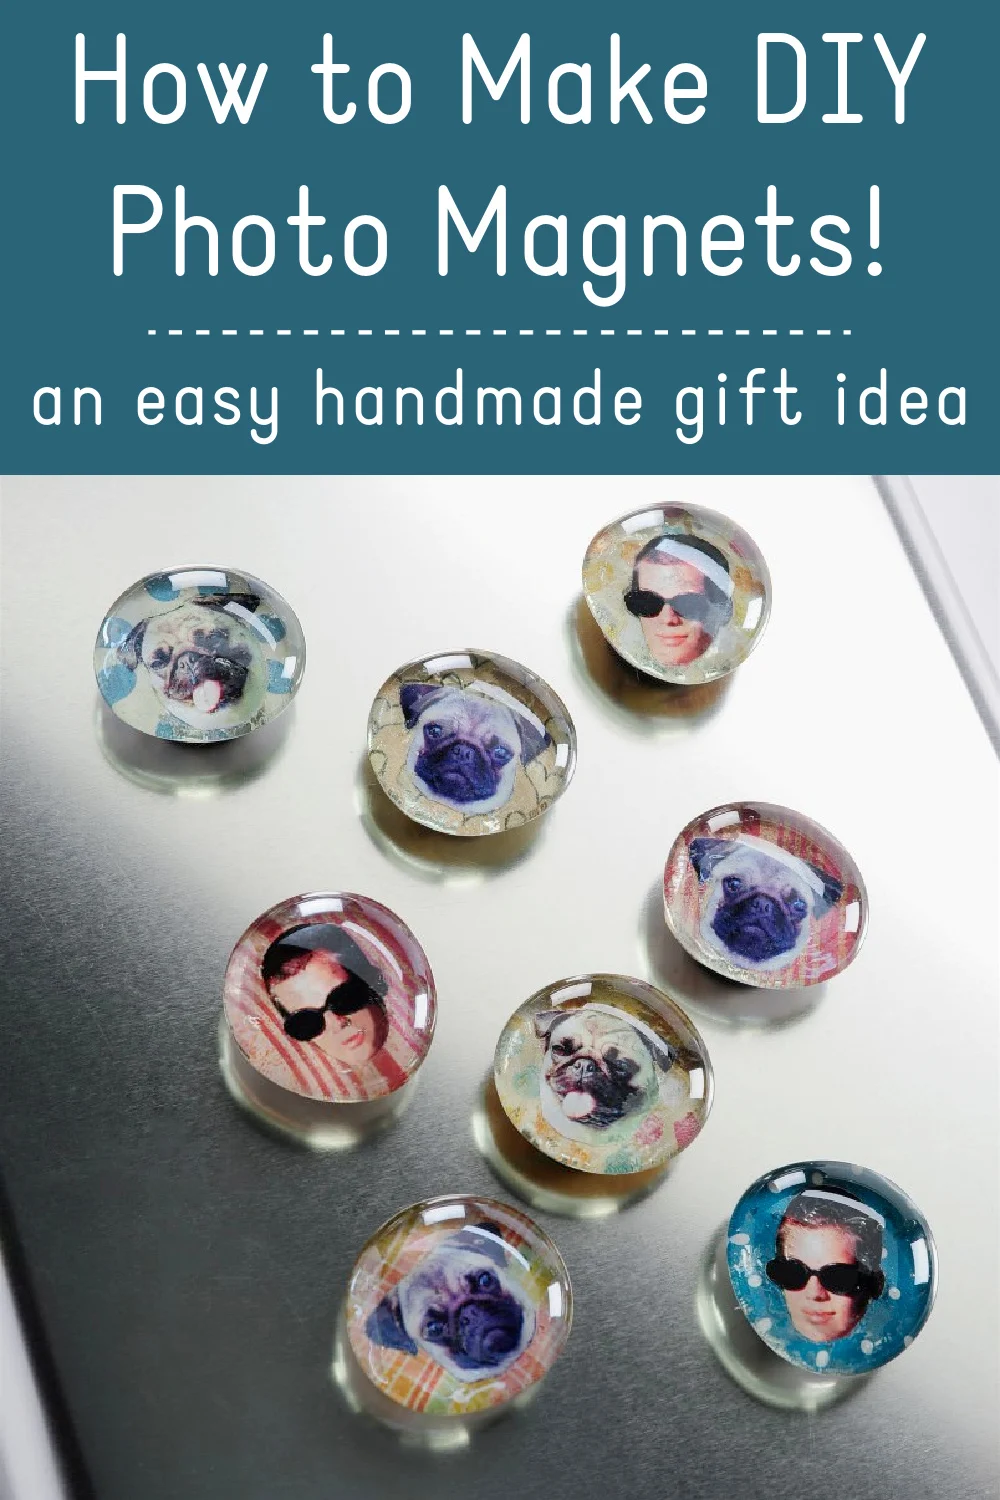 How to Make Picture Magnets from Old Photos